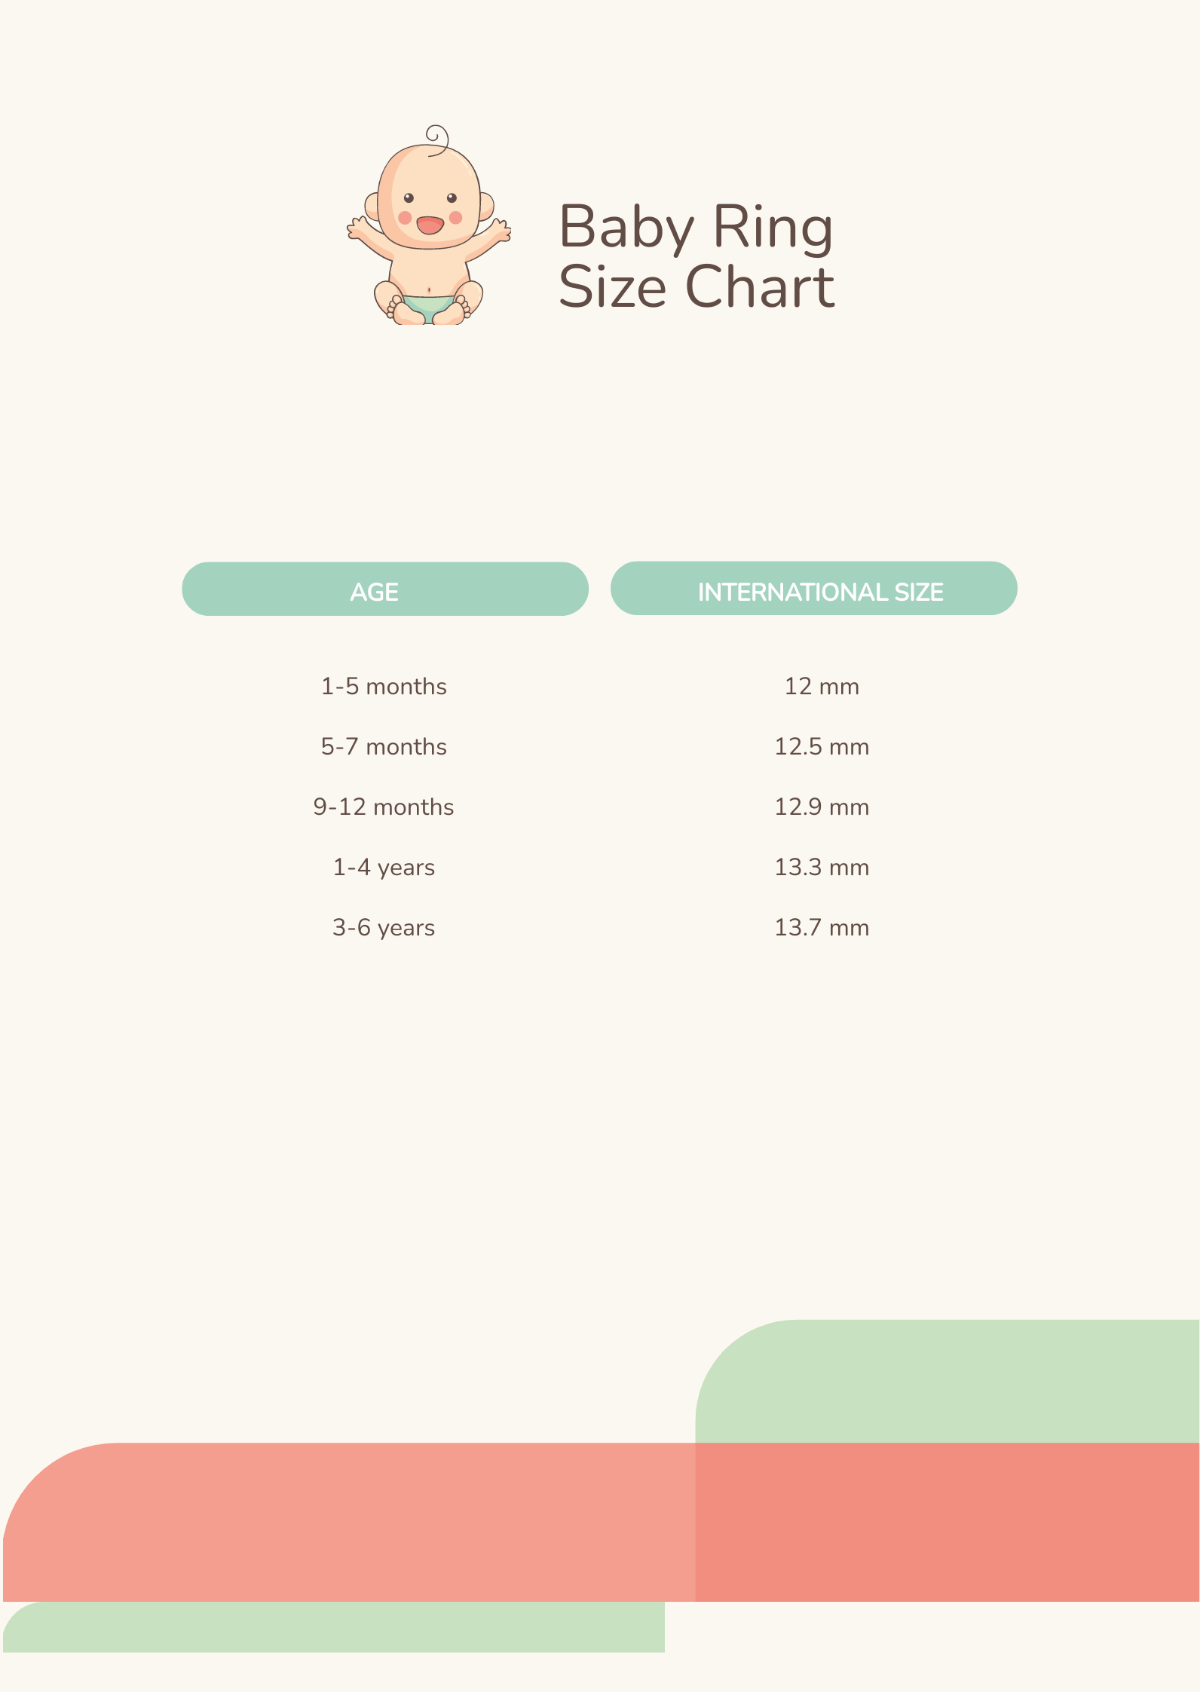 Baby Ring Size Chart Template